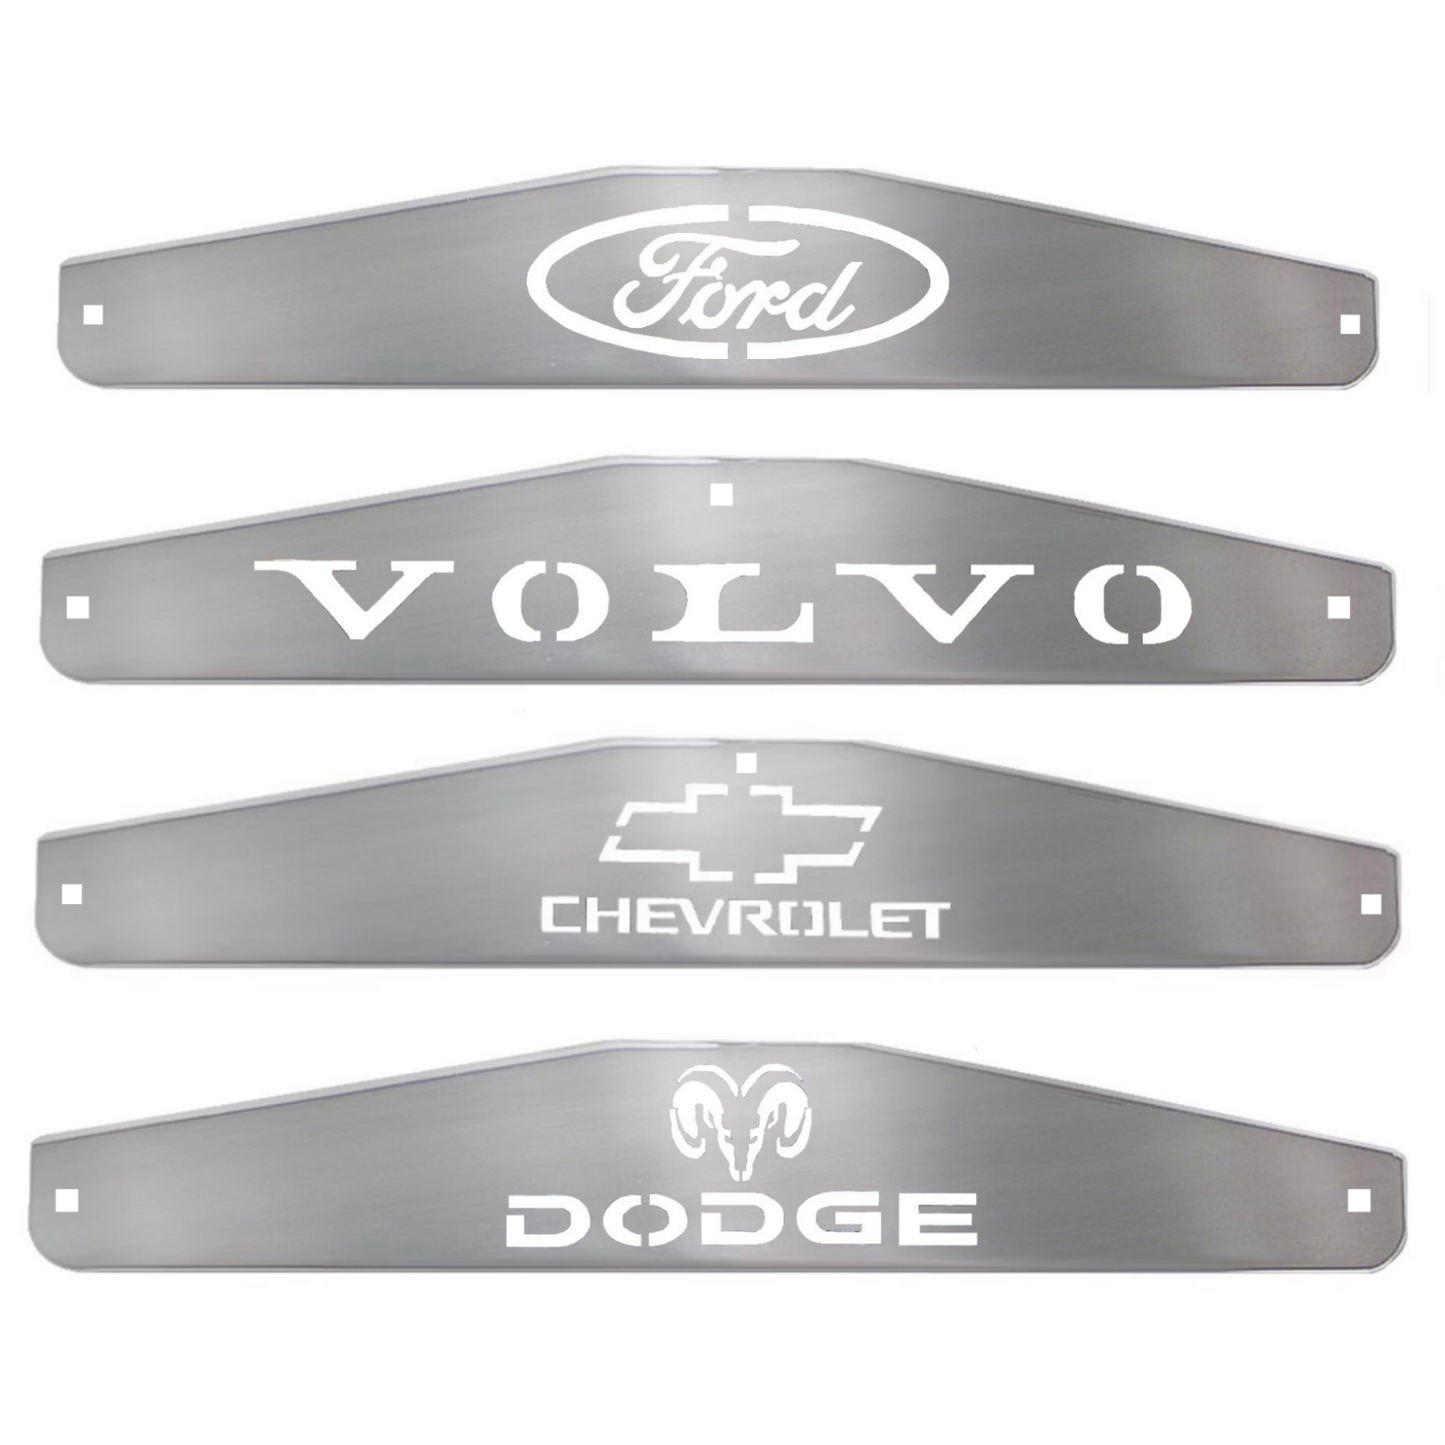 Mud Flap Weights With Logos Sold in Pairs